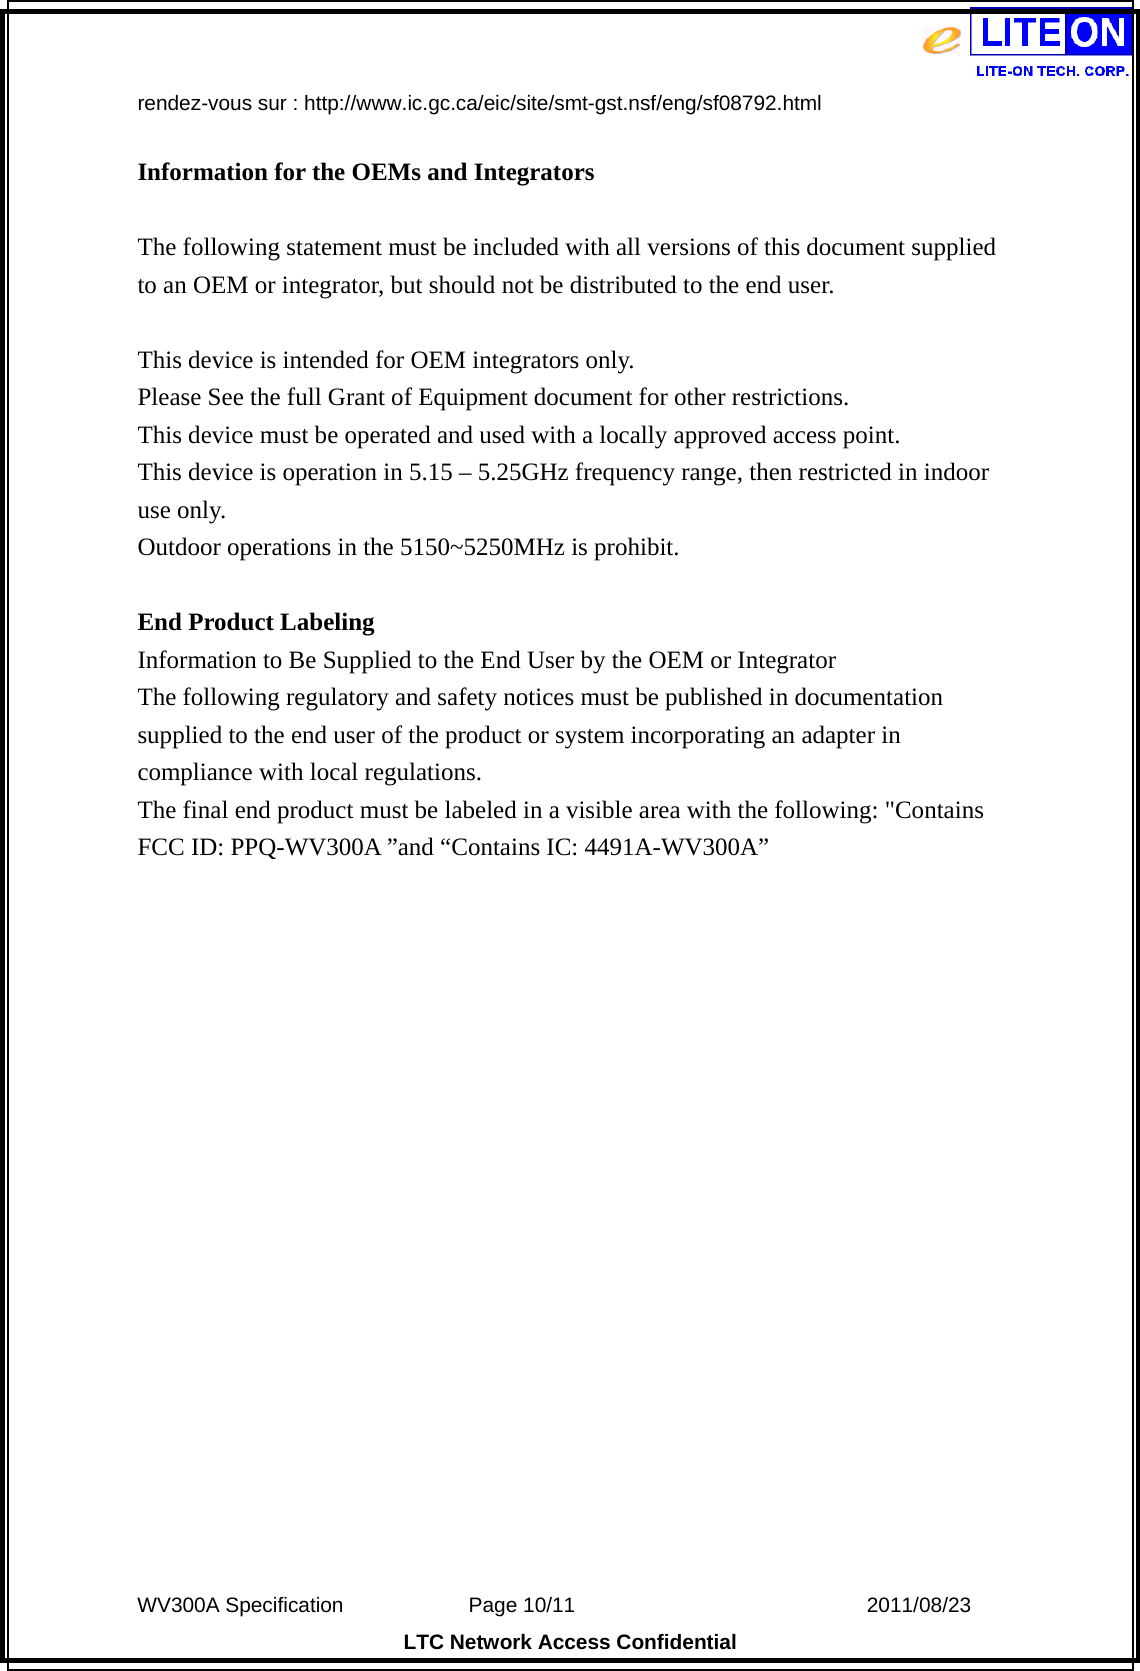  WV300A Specification             Page 10/11                            2011/08/23 LTC Network Access Confidential rendez-vous sur : http://www.ic.gc.ca/eic/site/smt-gst.nsf/eng/sf08792.html  Information for the OEMs and Integrators  The following statement must be included with all versions of this document supplied to an OEM or integrator, but should not be distributed to the end user.  This device is intended for OEM integrators only. Please See the full Grant of Equipment document for other restrictions. This device must be operated and used with a locally approved access point. This device is operation in 5.15 – 5.25GHz frequency range, then restricted in indoor use only. Outdoor operations in the 5150~5250MHz is prohibit.  End Product Labeling Information to Be Supplied to the End User by the OEM or Integrator The following regulatory and safety notices must be published in documentation supplied to the end user of the product or system incorporating an adapter in compliance with local regulations. The final end product must be labeled in a visible area with the following: &quot;Contains FCC ID: PPQ-WV300A ”and “Contains IC: 4491A-WV300A”   